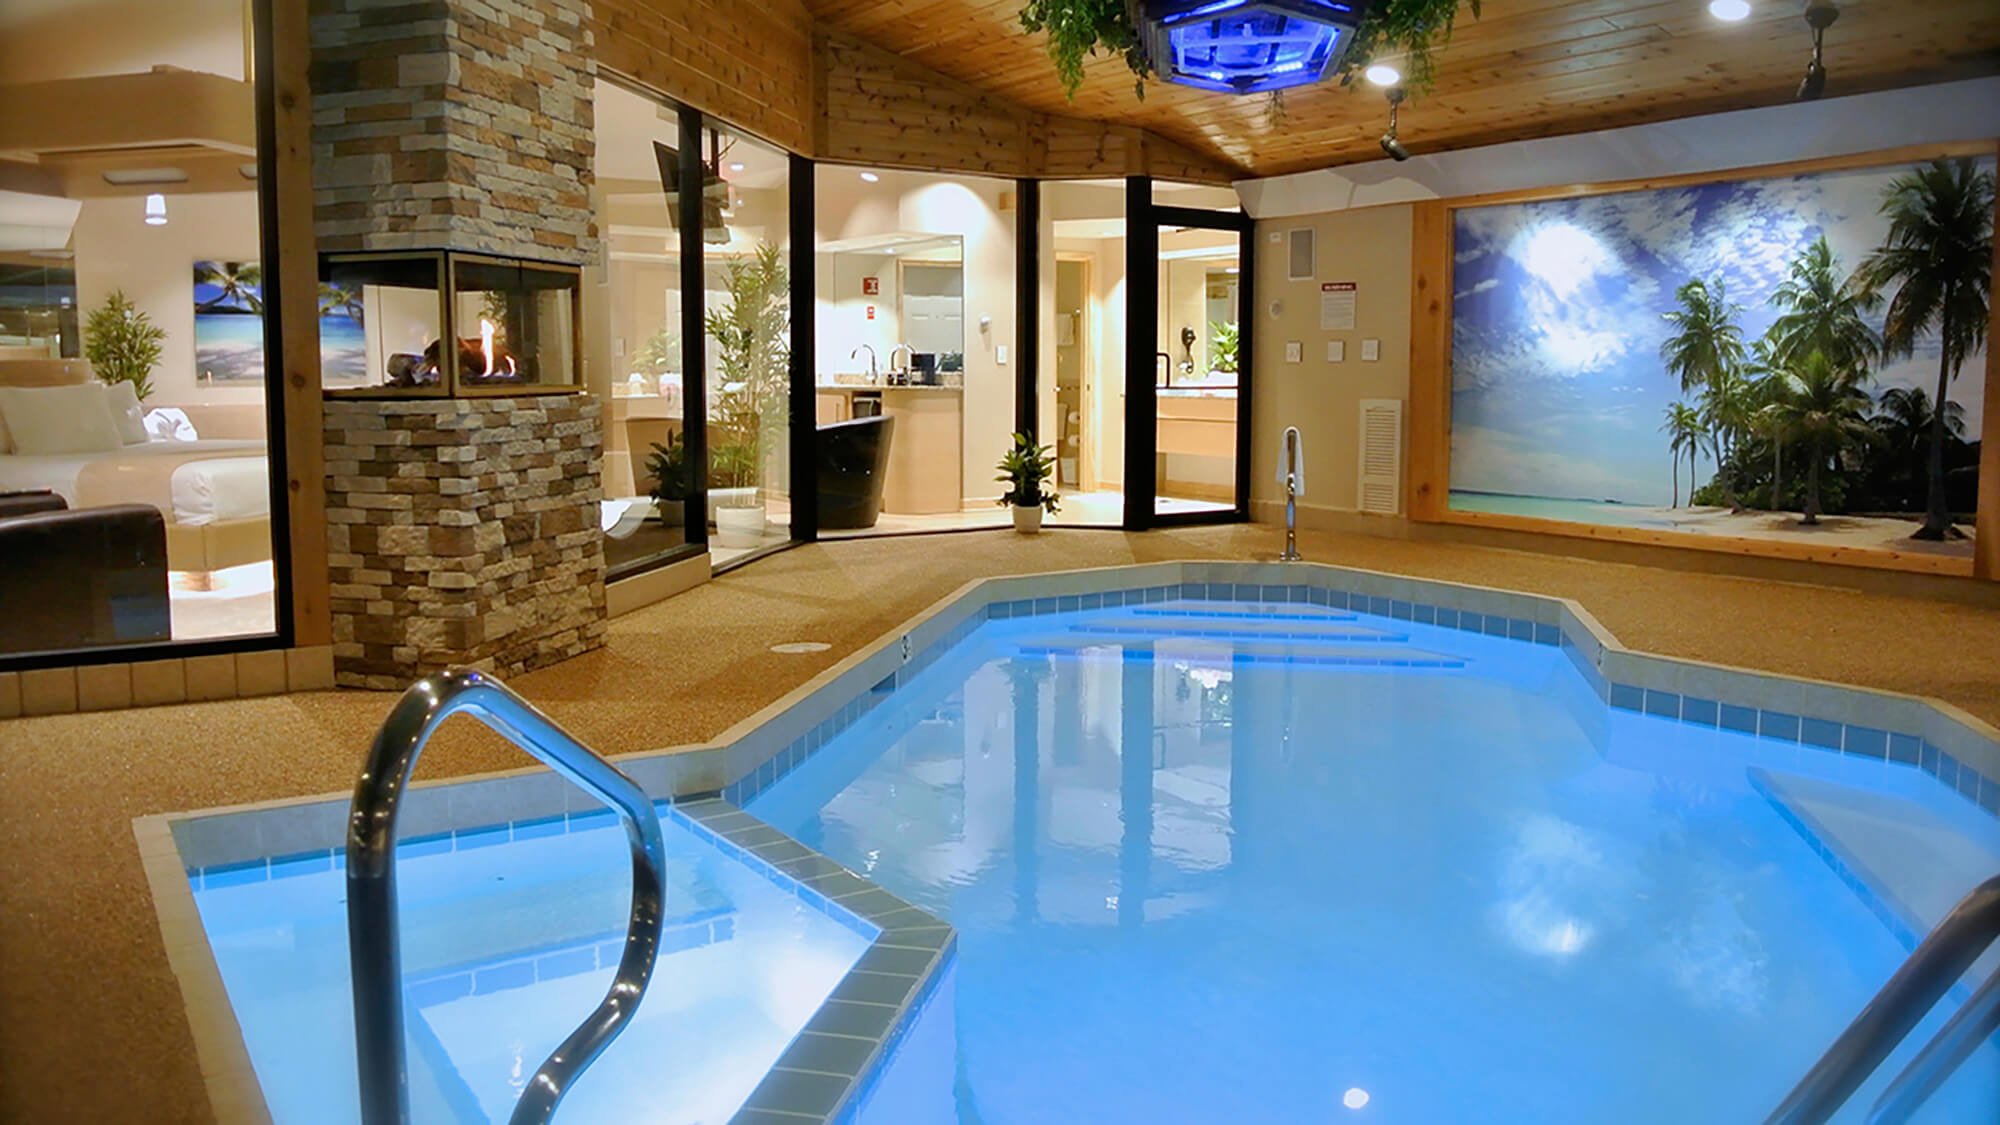 MAJESTIC SWIMMING POOL SUITE - Learn more...